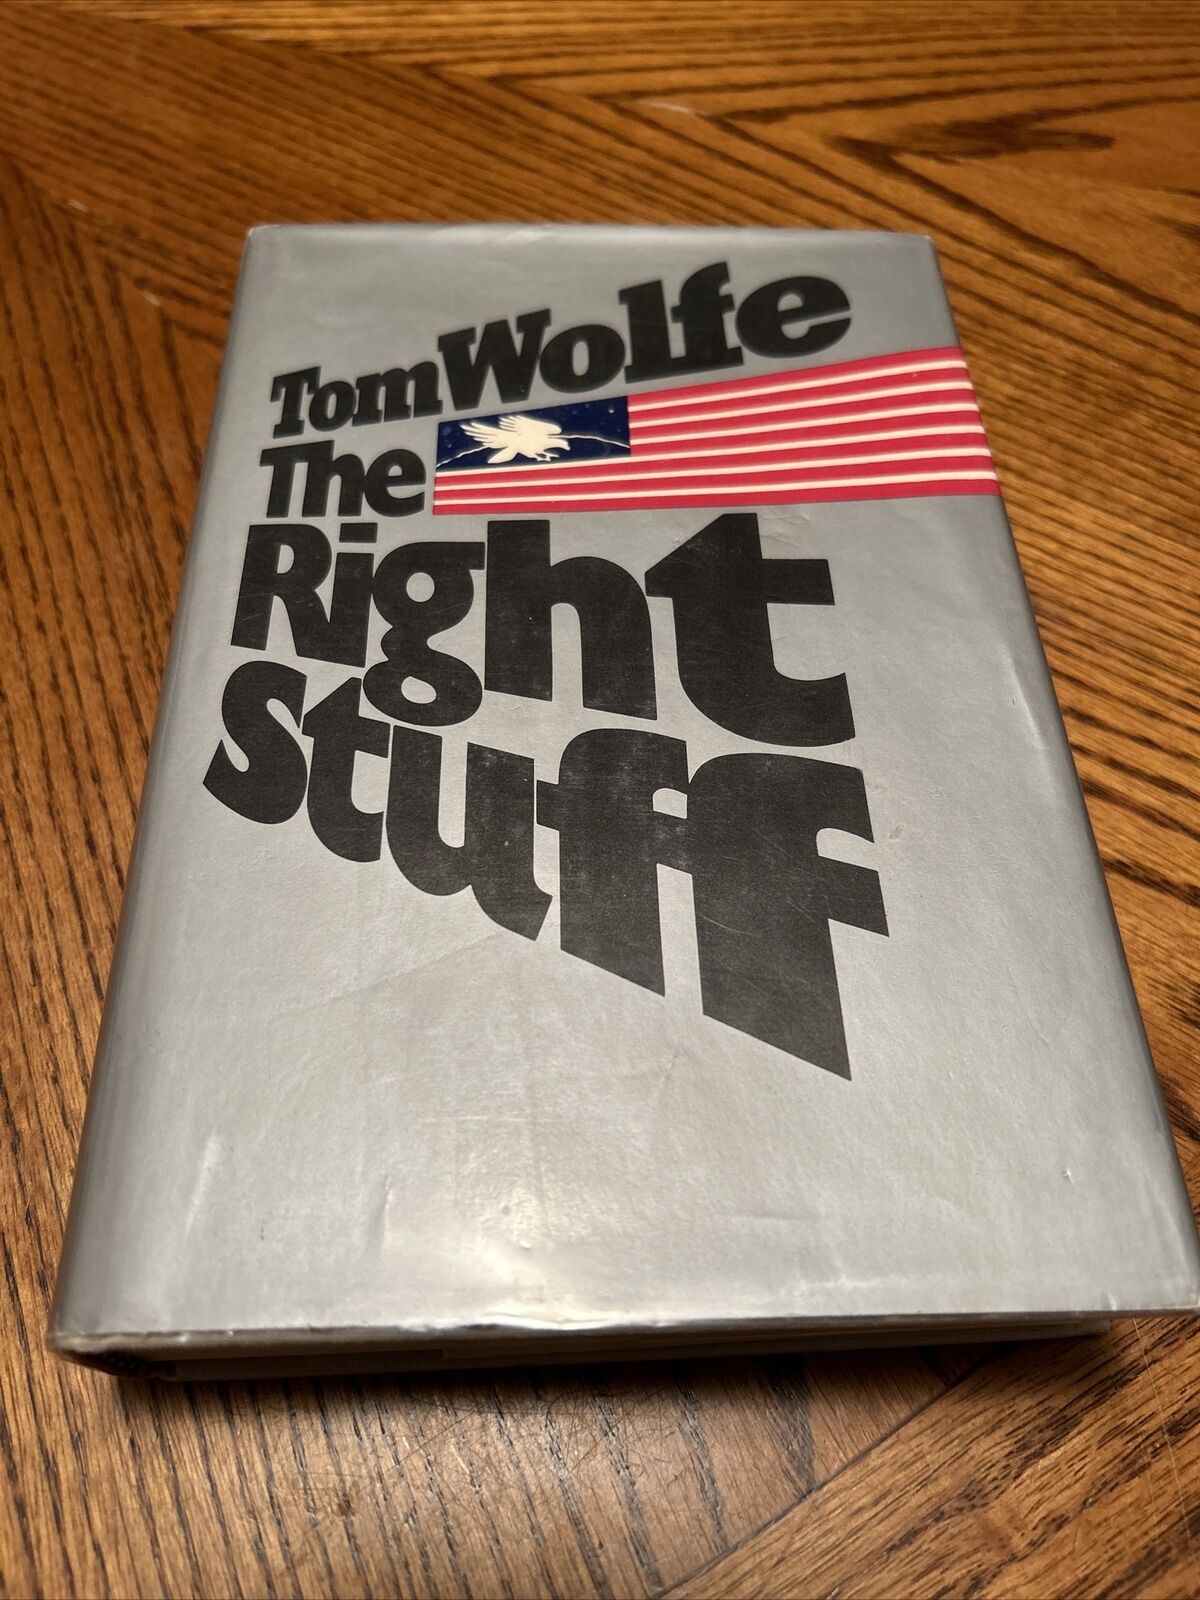 RARE Tom Wolfe The Right Stuff First Edition with JSA Jim Louvell signed BP